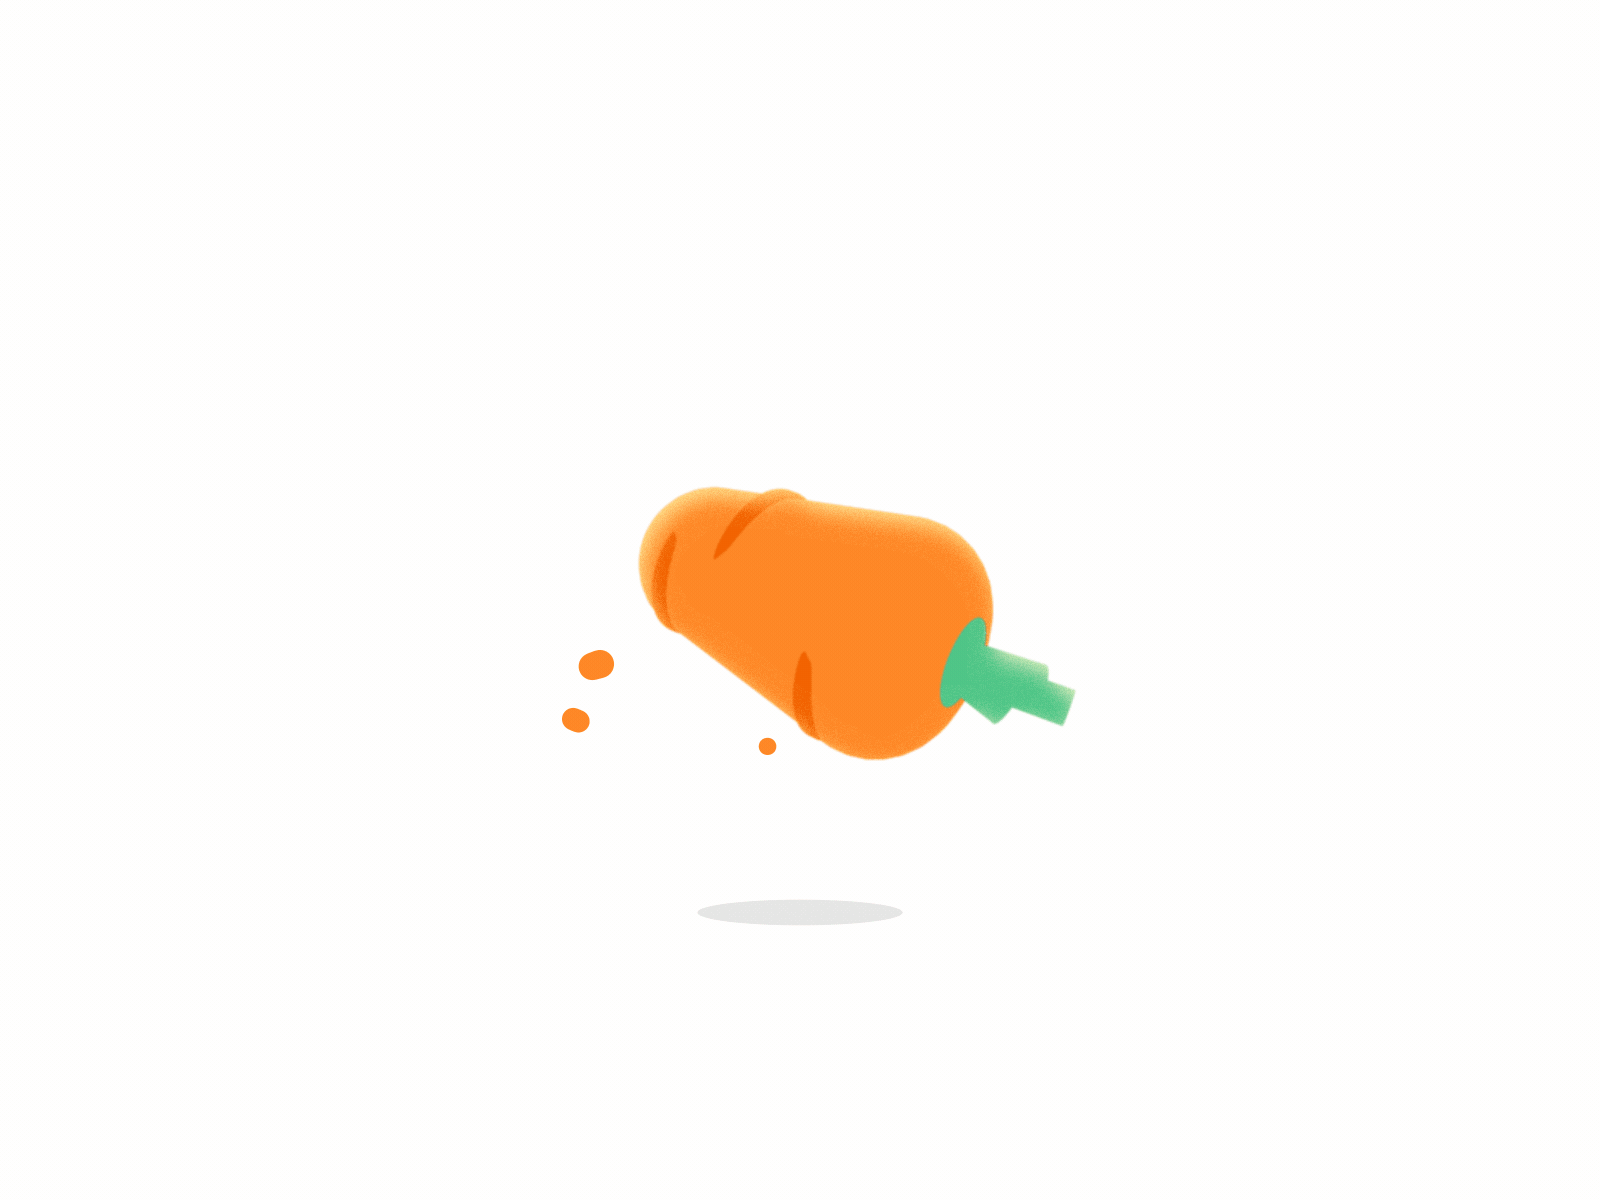 Foodie Maryam - Loading 3 app loading carrot animation eggplant animation food and beverage food and drink food app food delivery food illustration food loading foodie loading loading bar loading page loading screen recipe recipe app vegetable vegetables vegetarian website loading